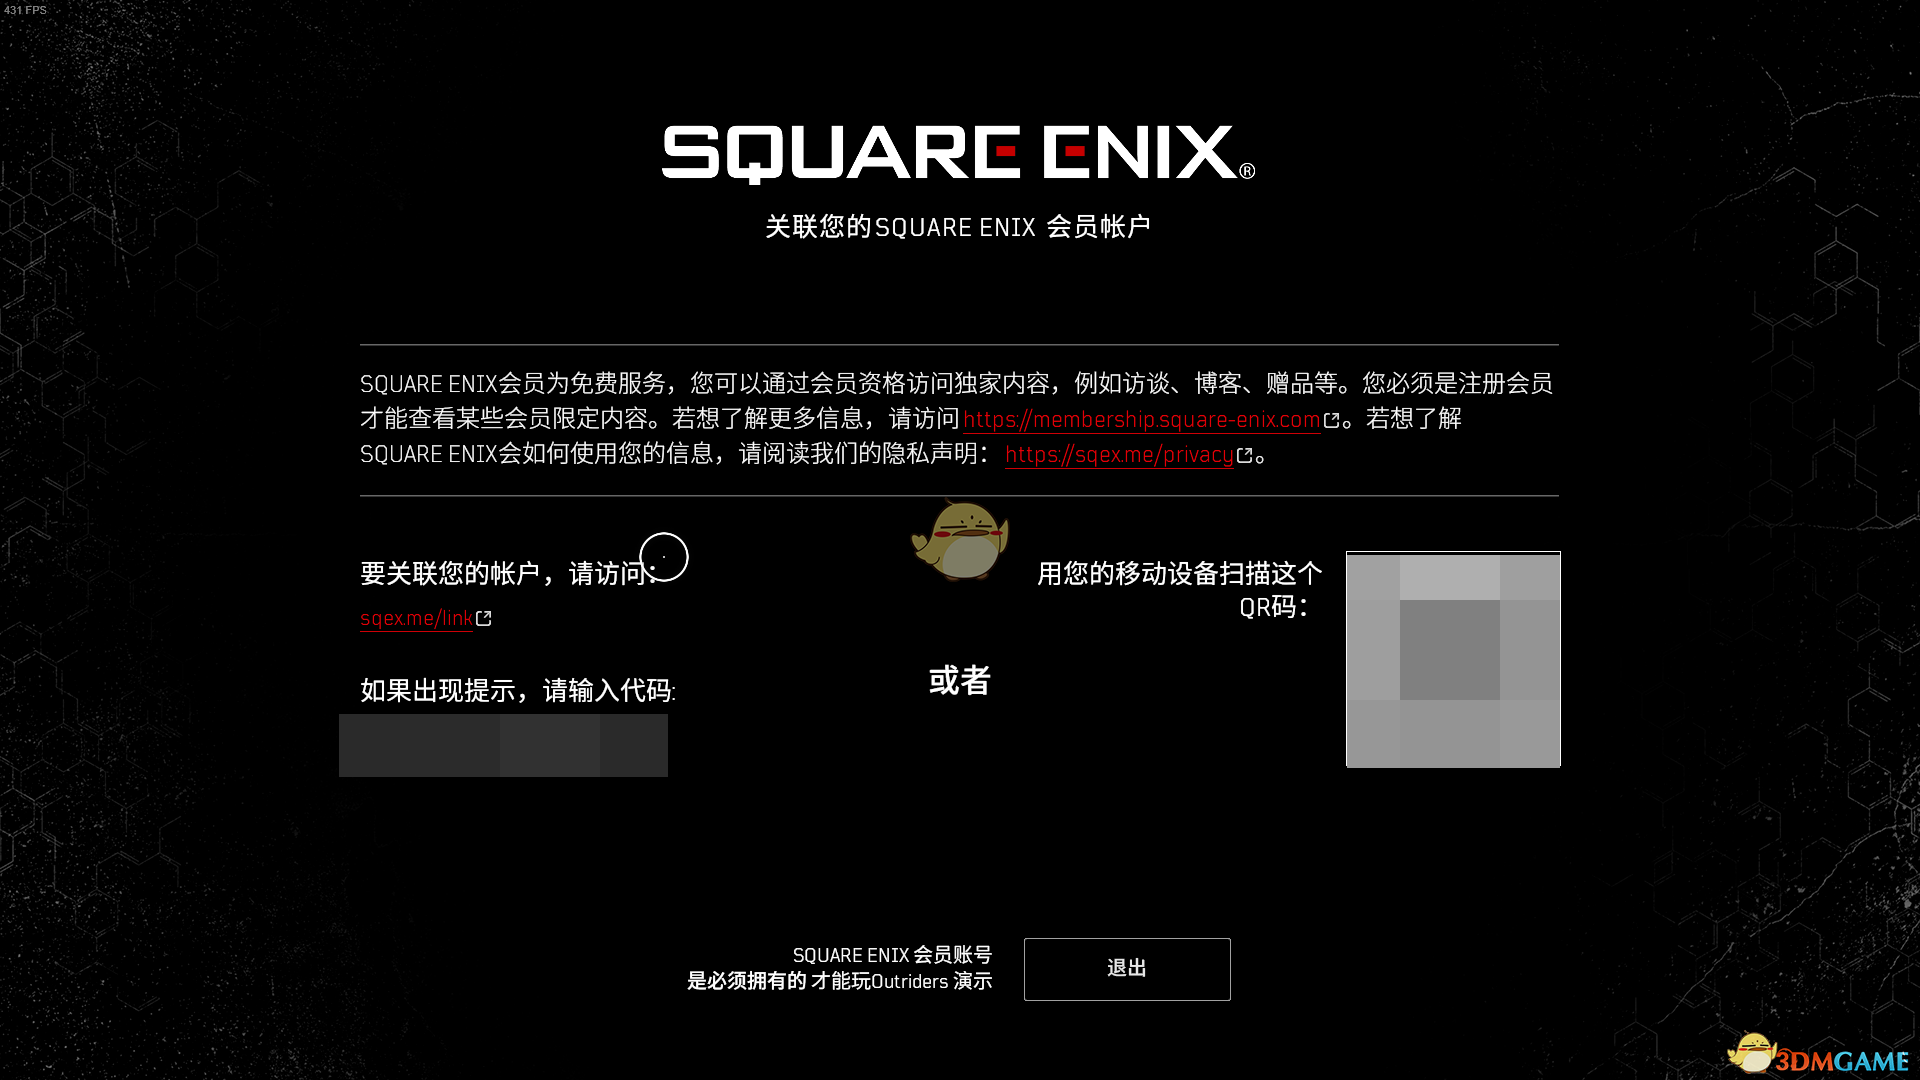 《Outriders》关联SQUARE ENIX账号教程